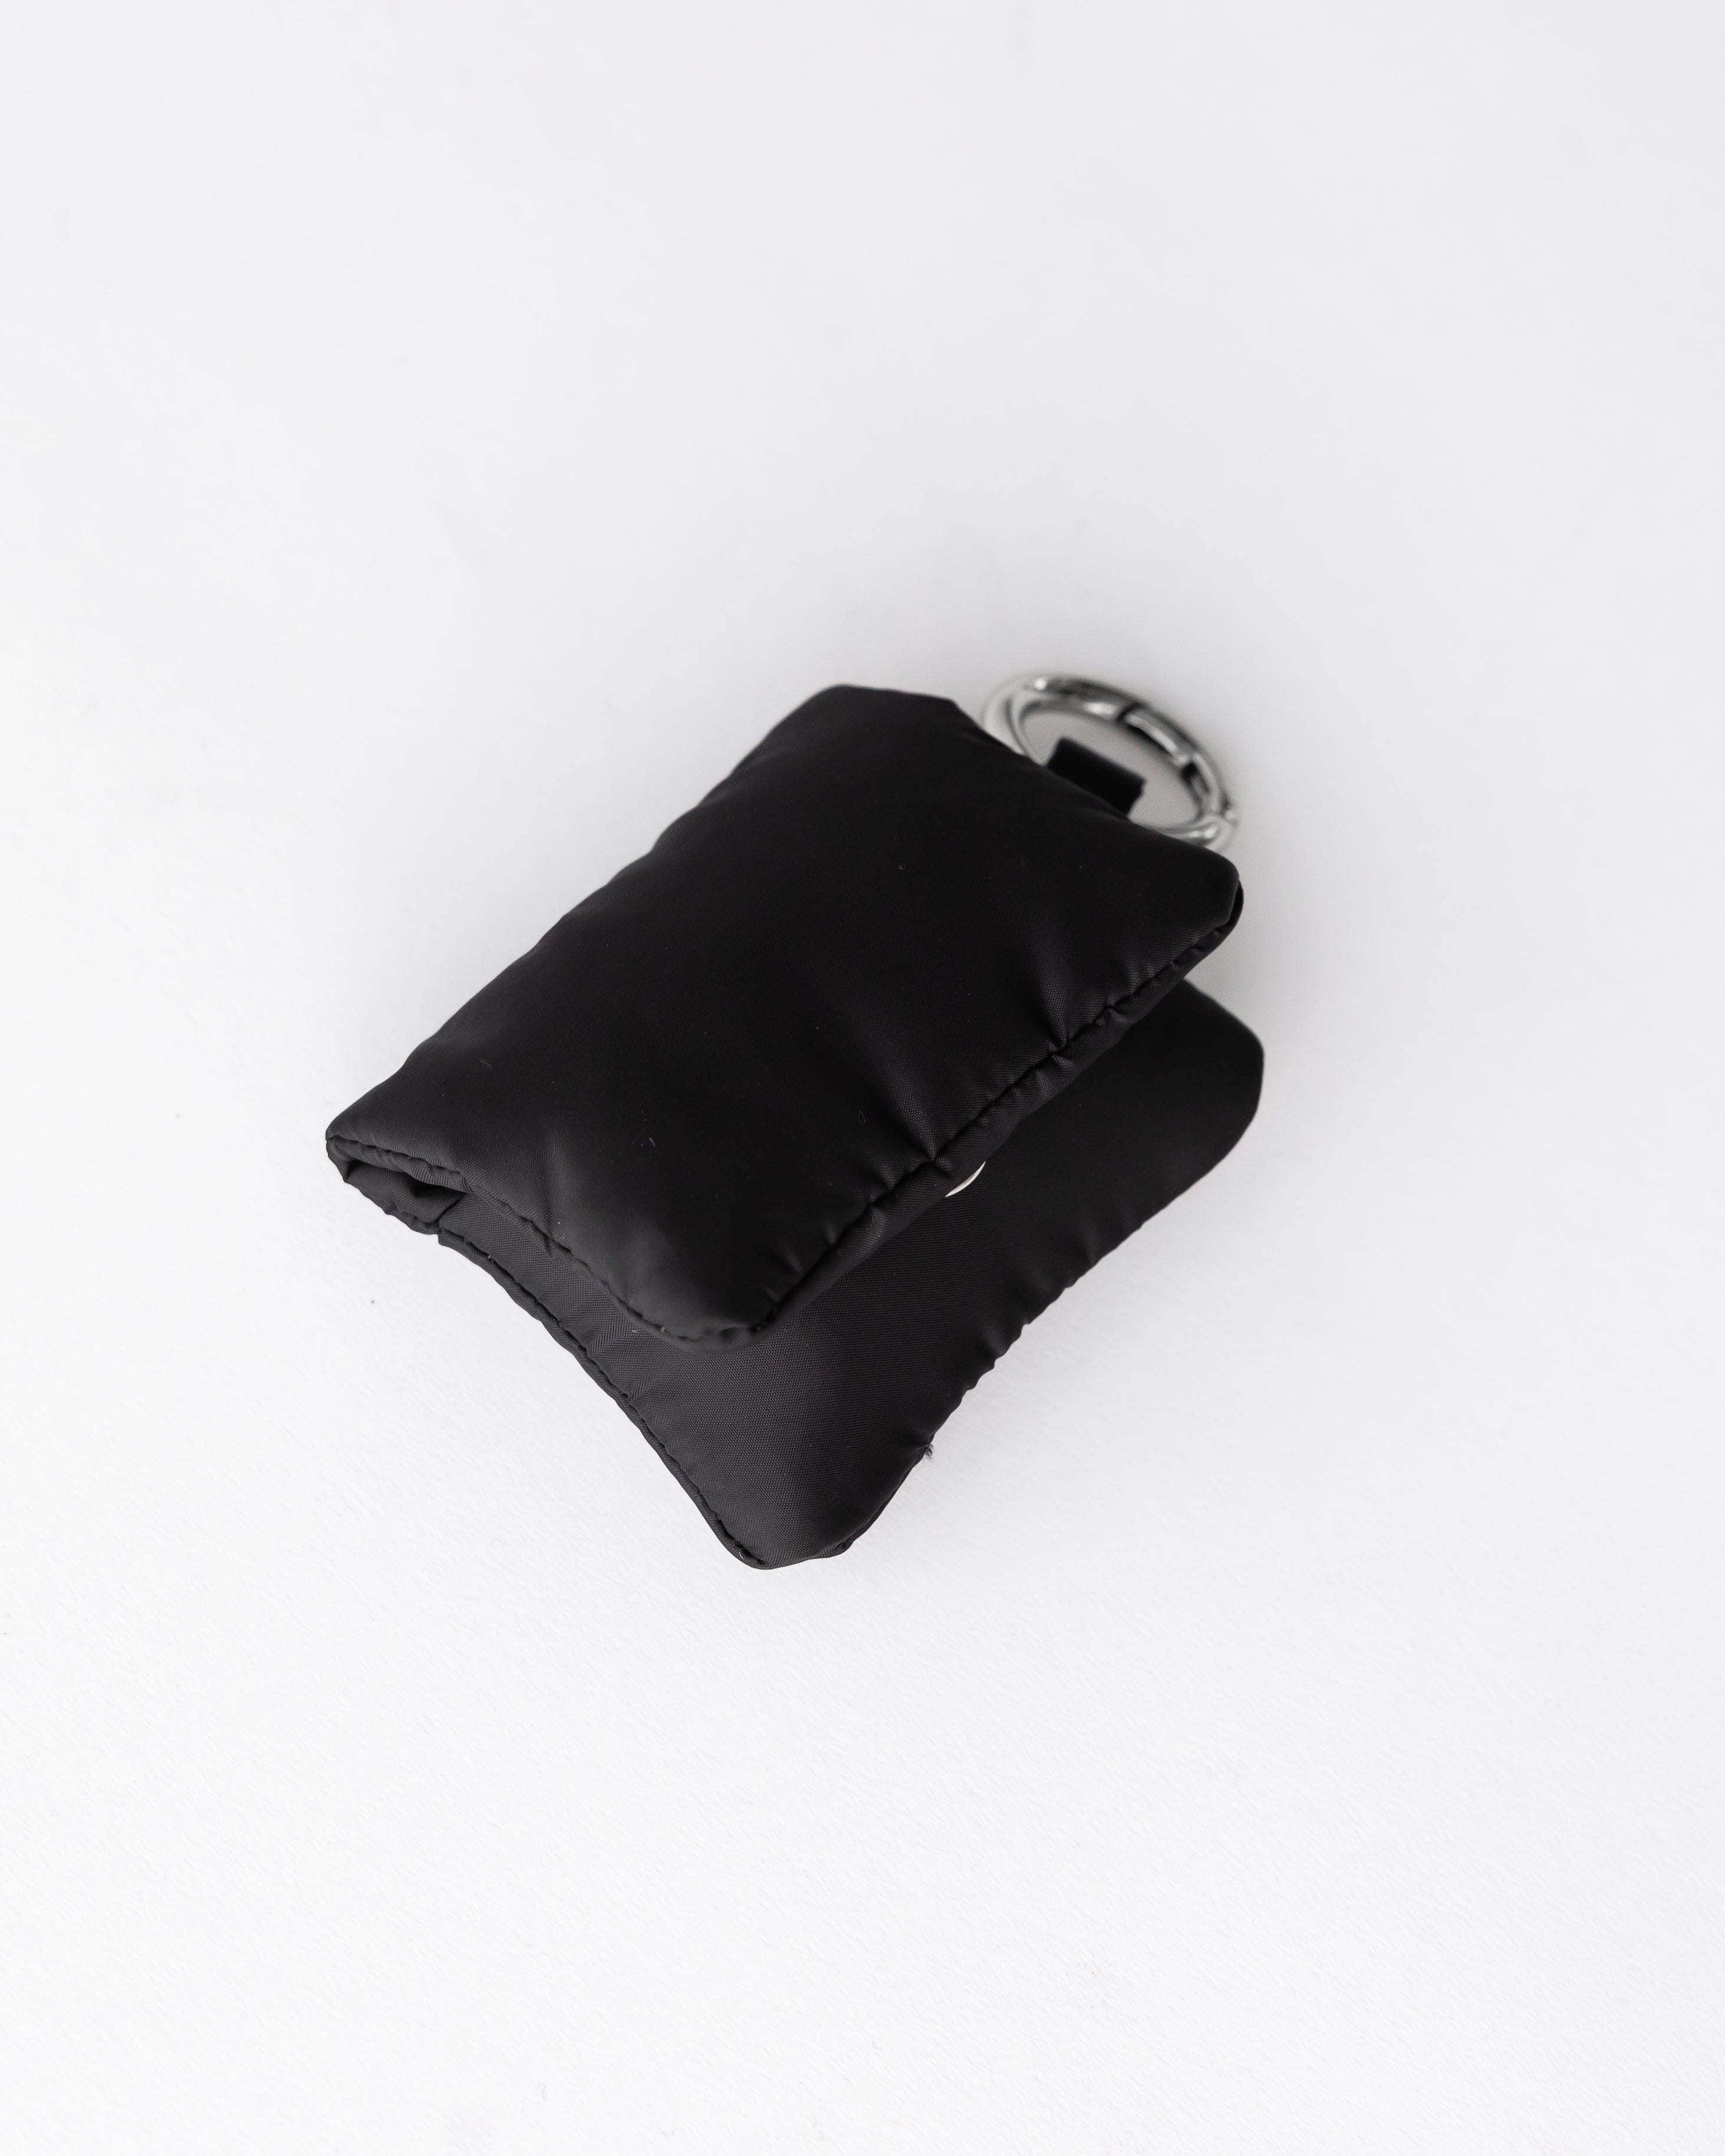 【2.12 mon 20:00- Pre order】PADDED AIRPODS CASE.